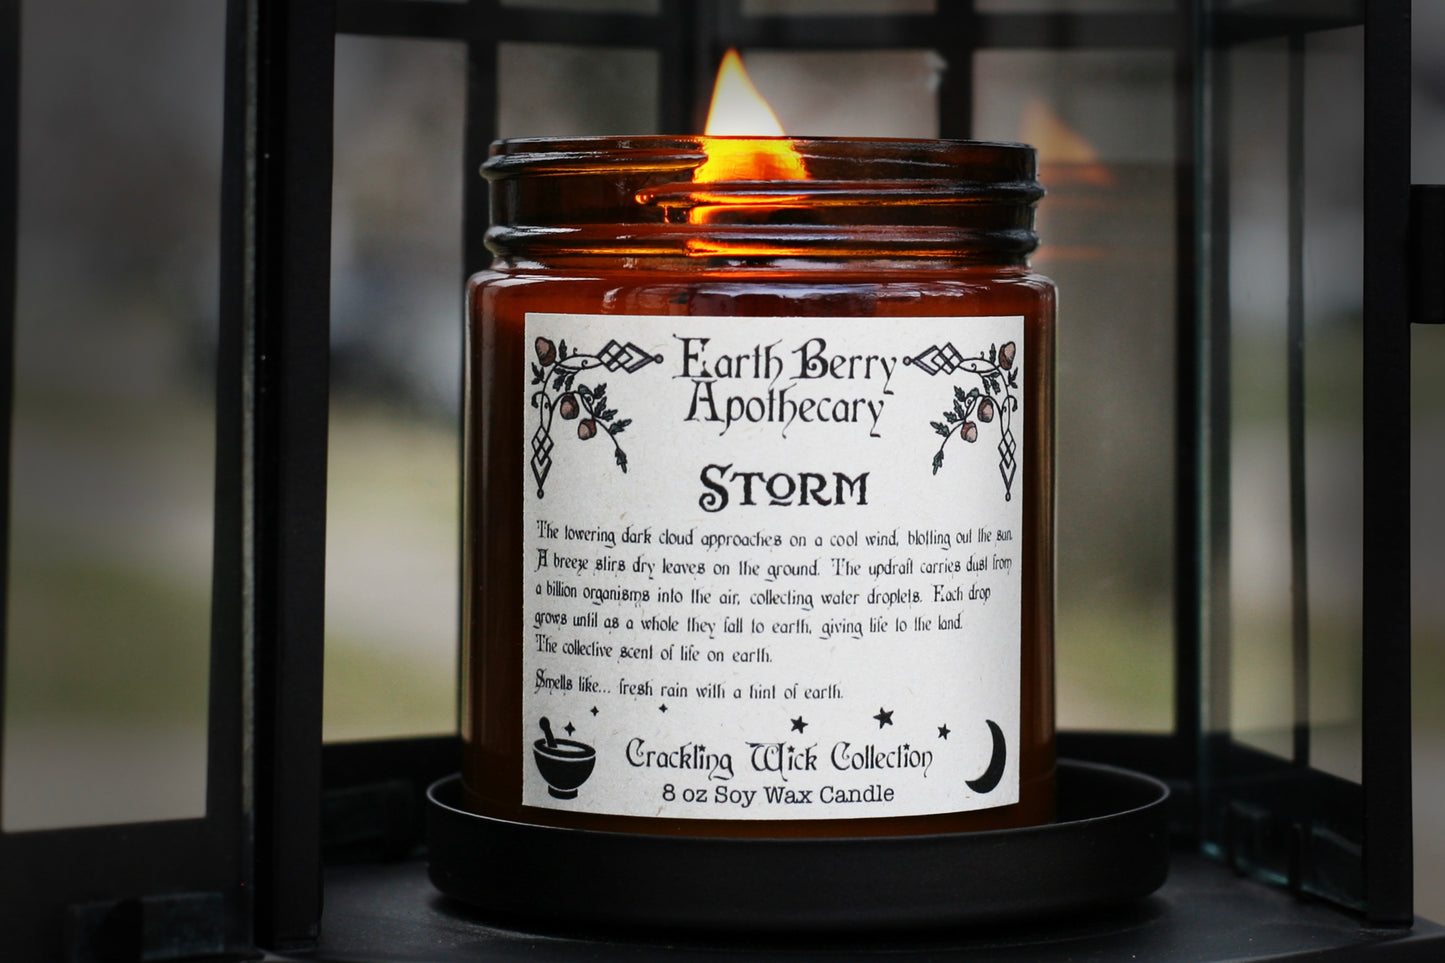  Long Lasting Candle, Wood Wick Candles That Crackle